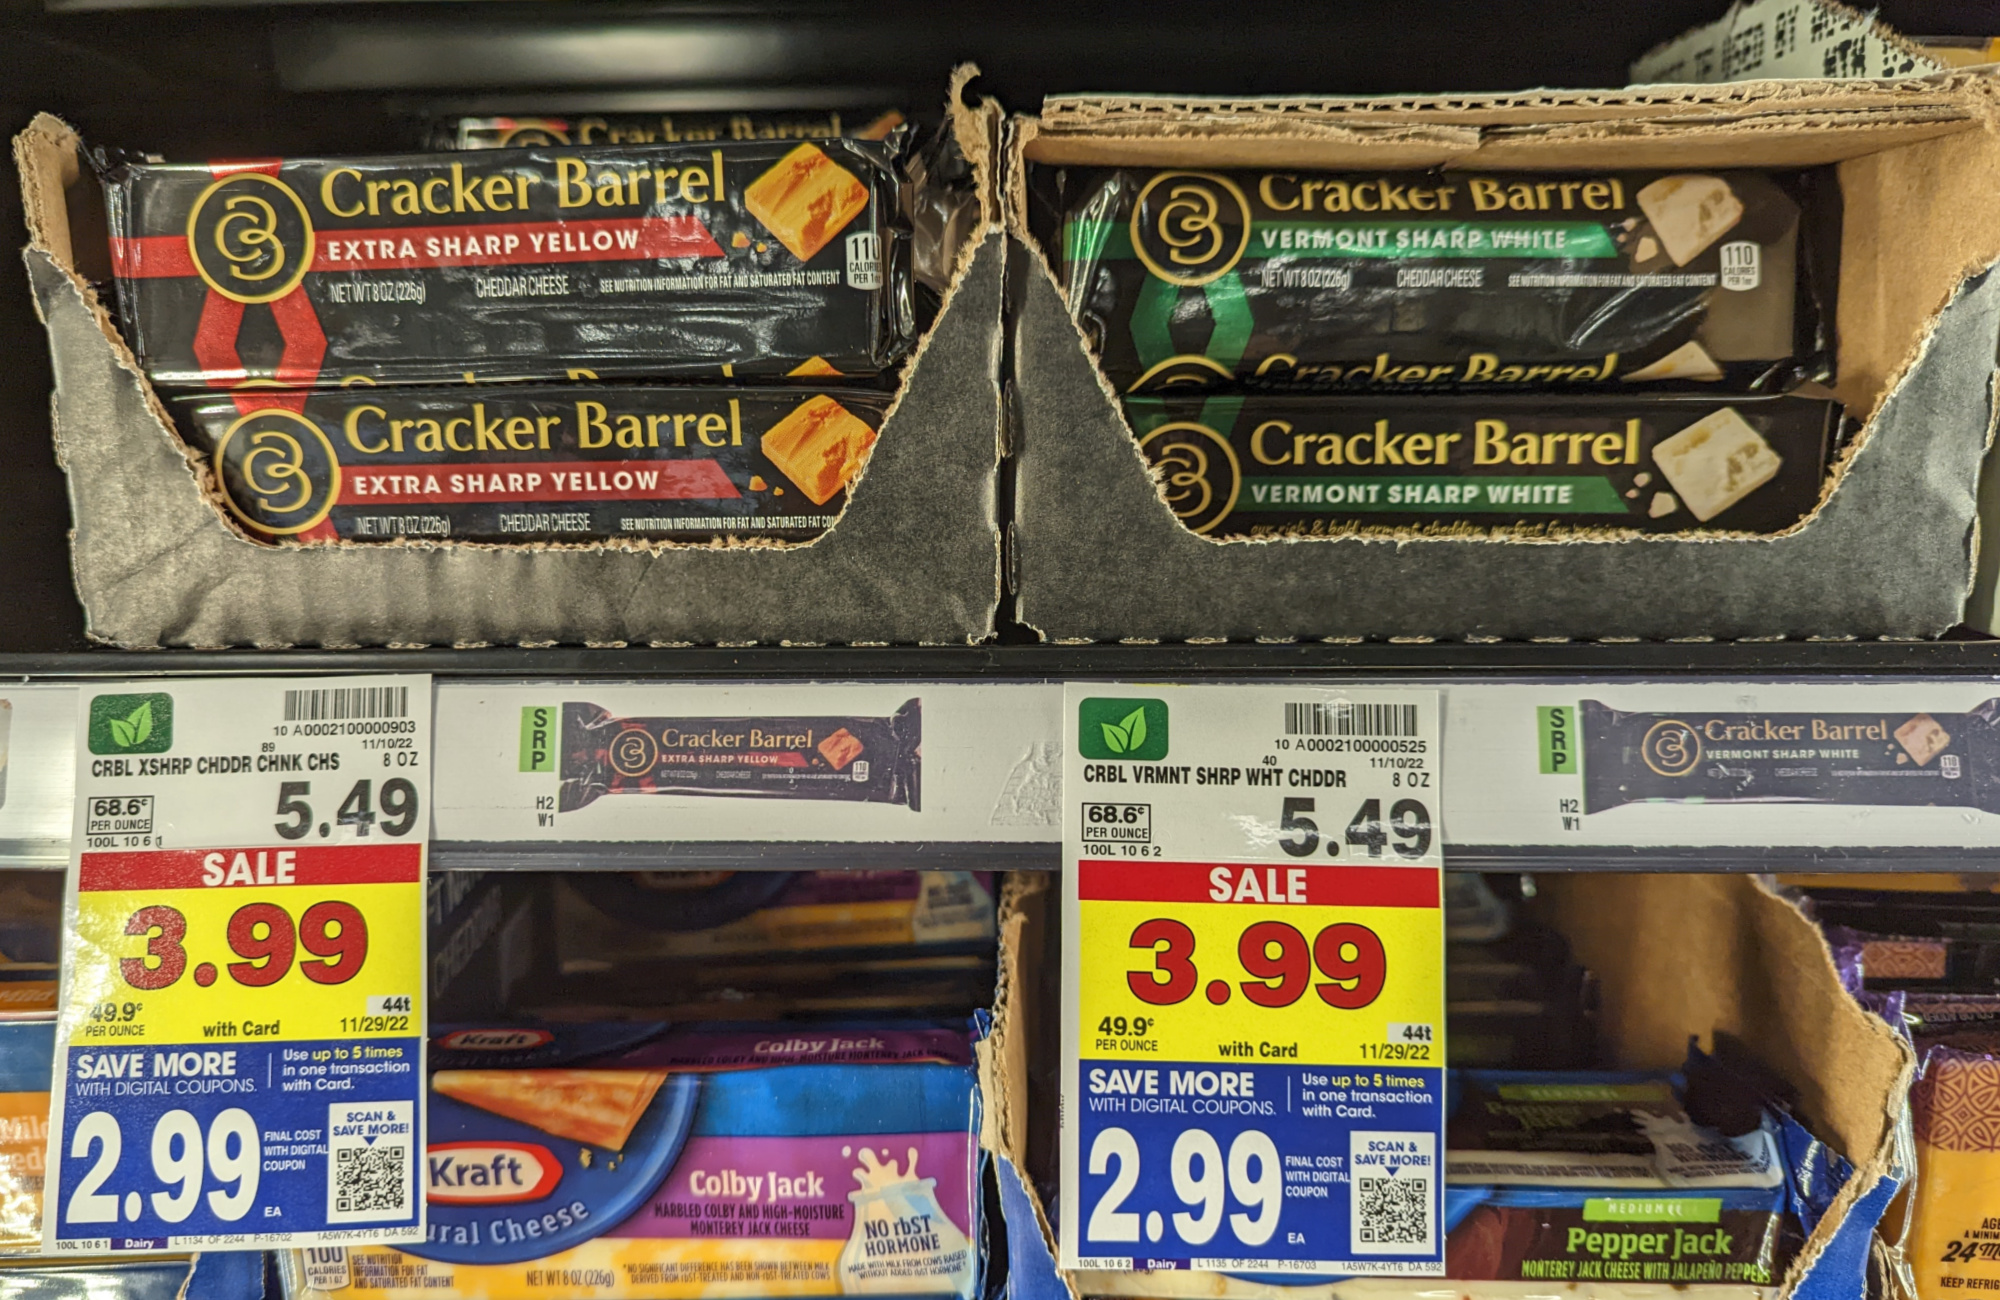 Cracker Barrel Cheese Chunks As Low As $1.99 At Kroger - iHeartKroger